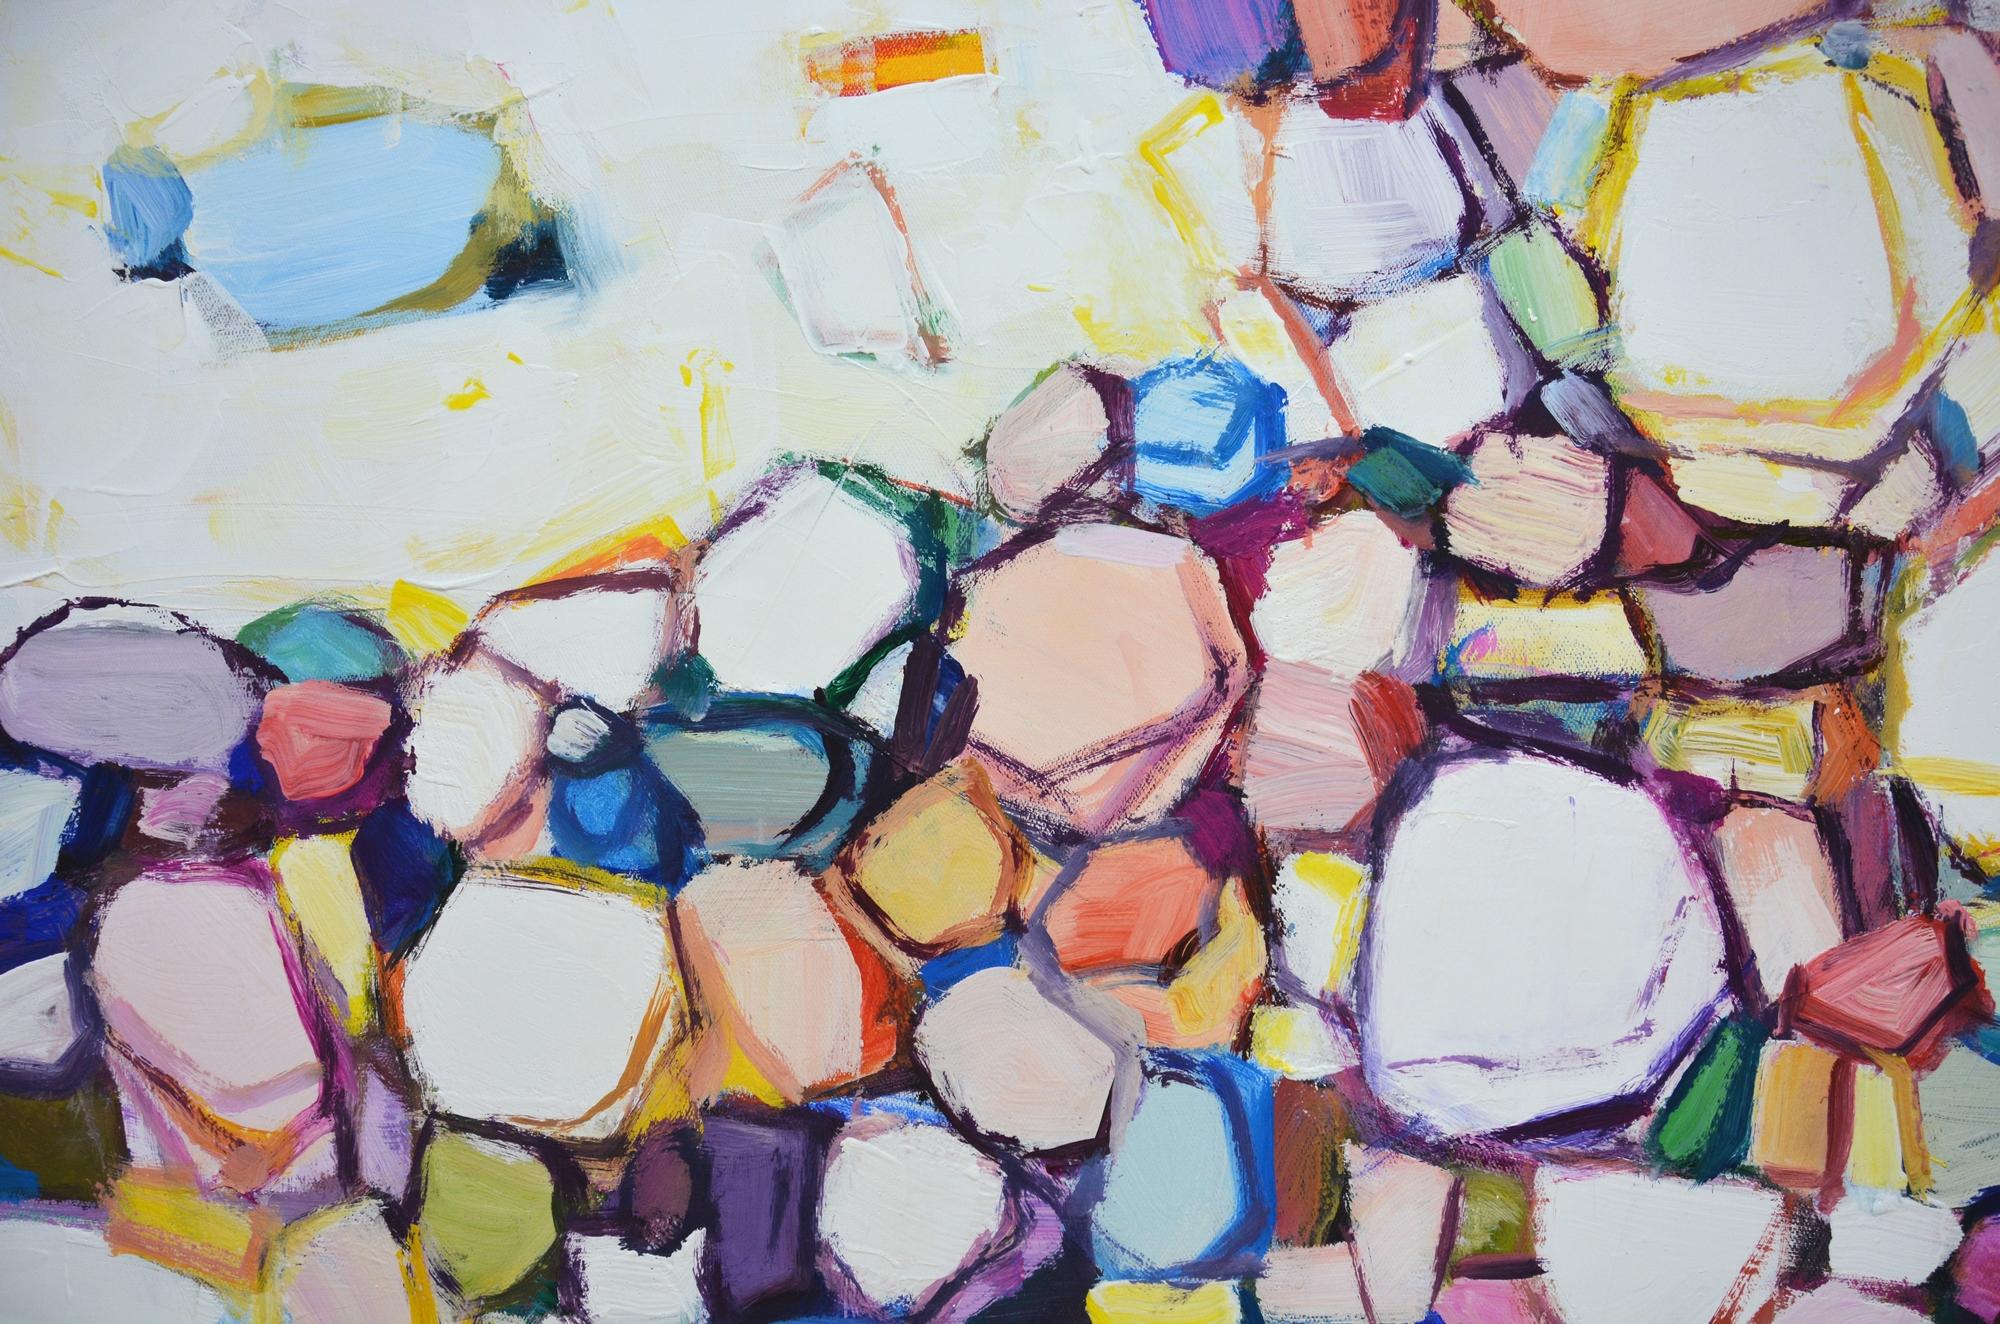 Gems. A modernist abstract painting with overlapping different shapes in a bright palette against a light background. The painting has a delicate balance of free, spontaneous application of shapes and colors. The work is filled with energy of